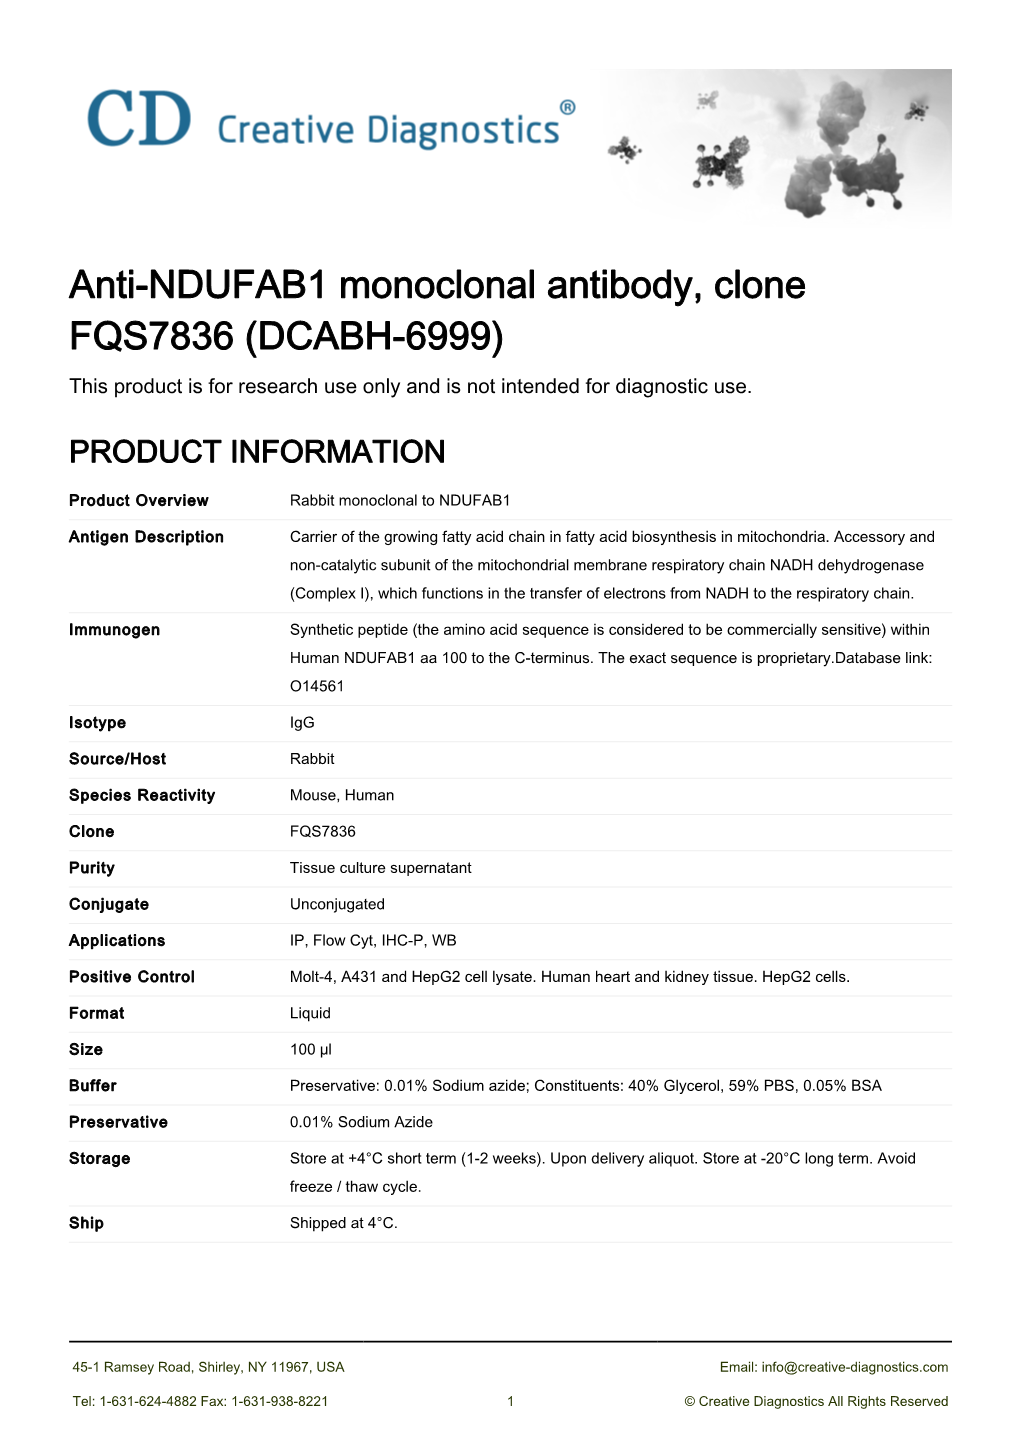 Anti-NDUFAB1 Monoclonal Antibody, Clone FQS7836 (DCABH-6999) This Product Is for Research Use Only and Is Not Intended for Diagnostic Use